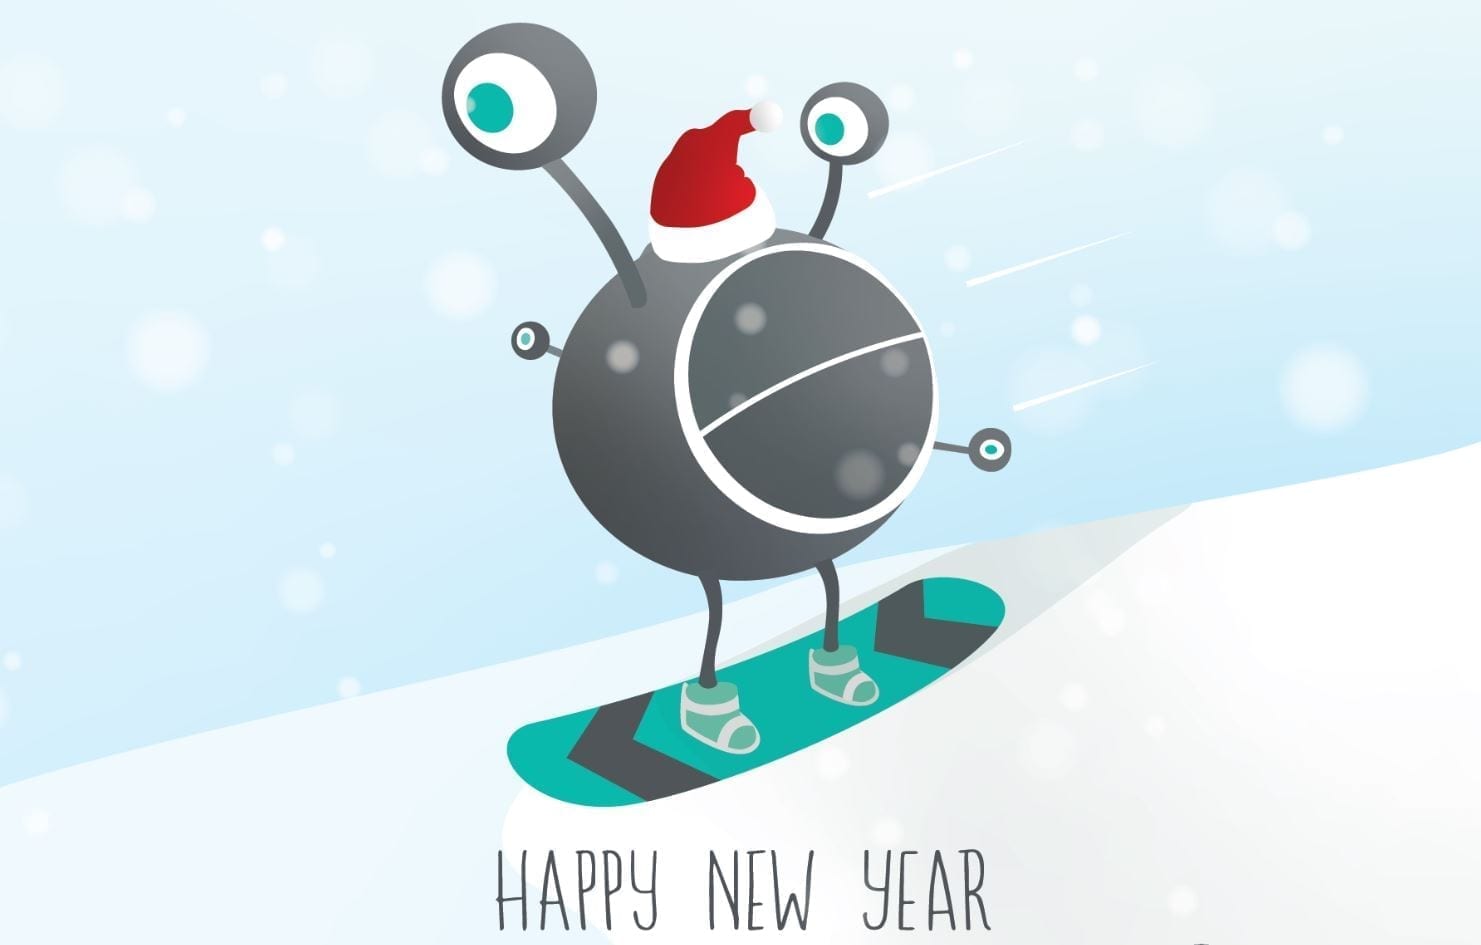 The whole team wishes you a happy new year !